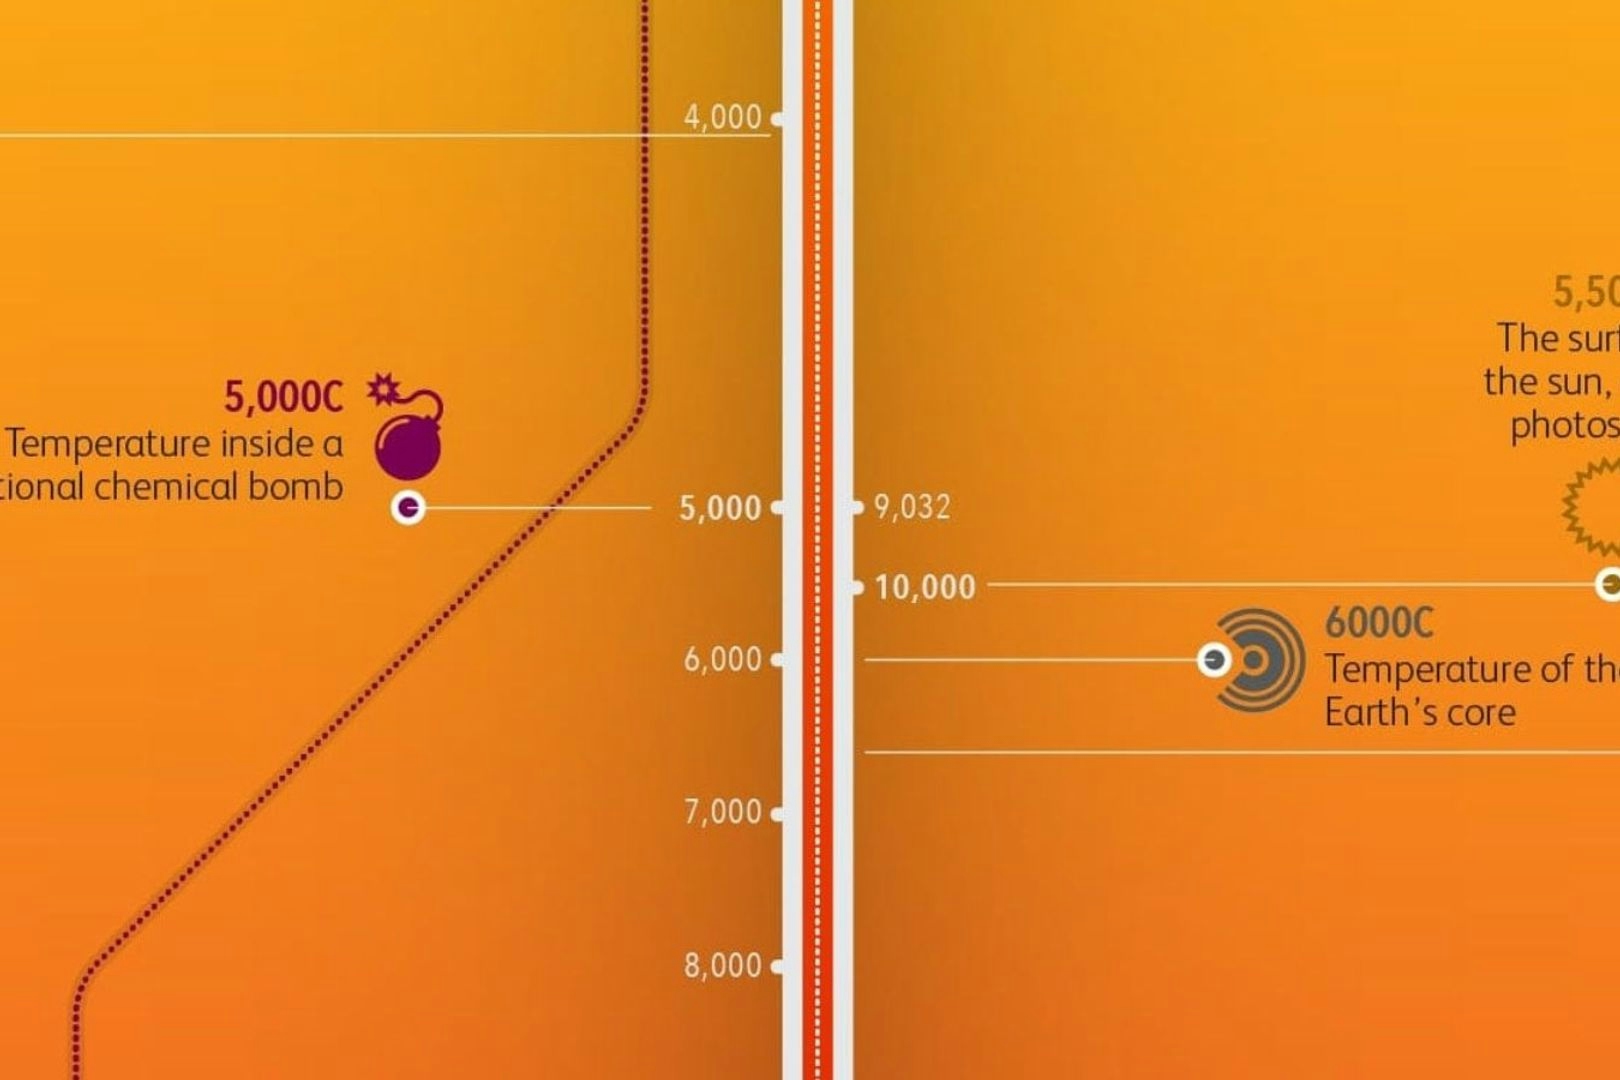 An imae of the Billion Degrees of Separation graphic. It shows a thermometer running vertically down the centre of the image with facts labelled on at different temperatures such as 6,000 degrees Celcius, the temperature of Earth's core.